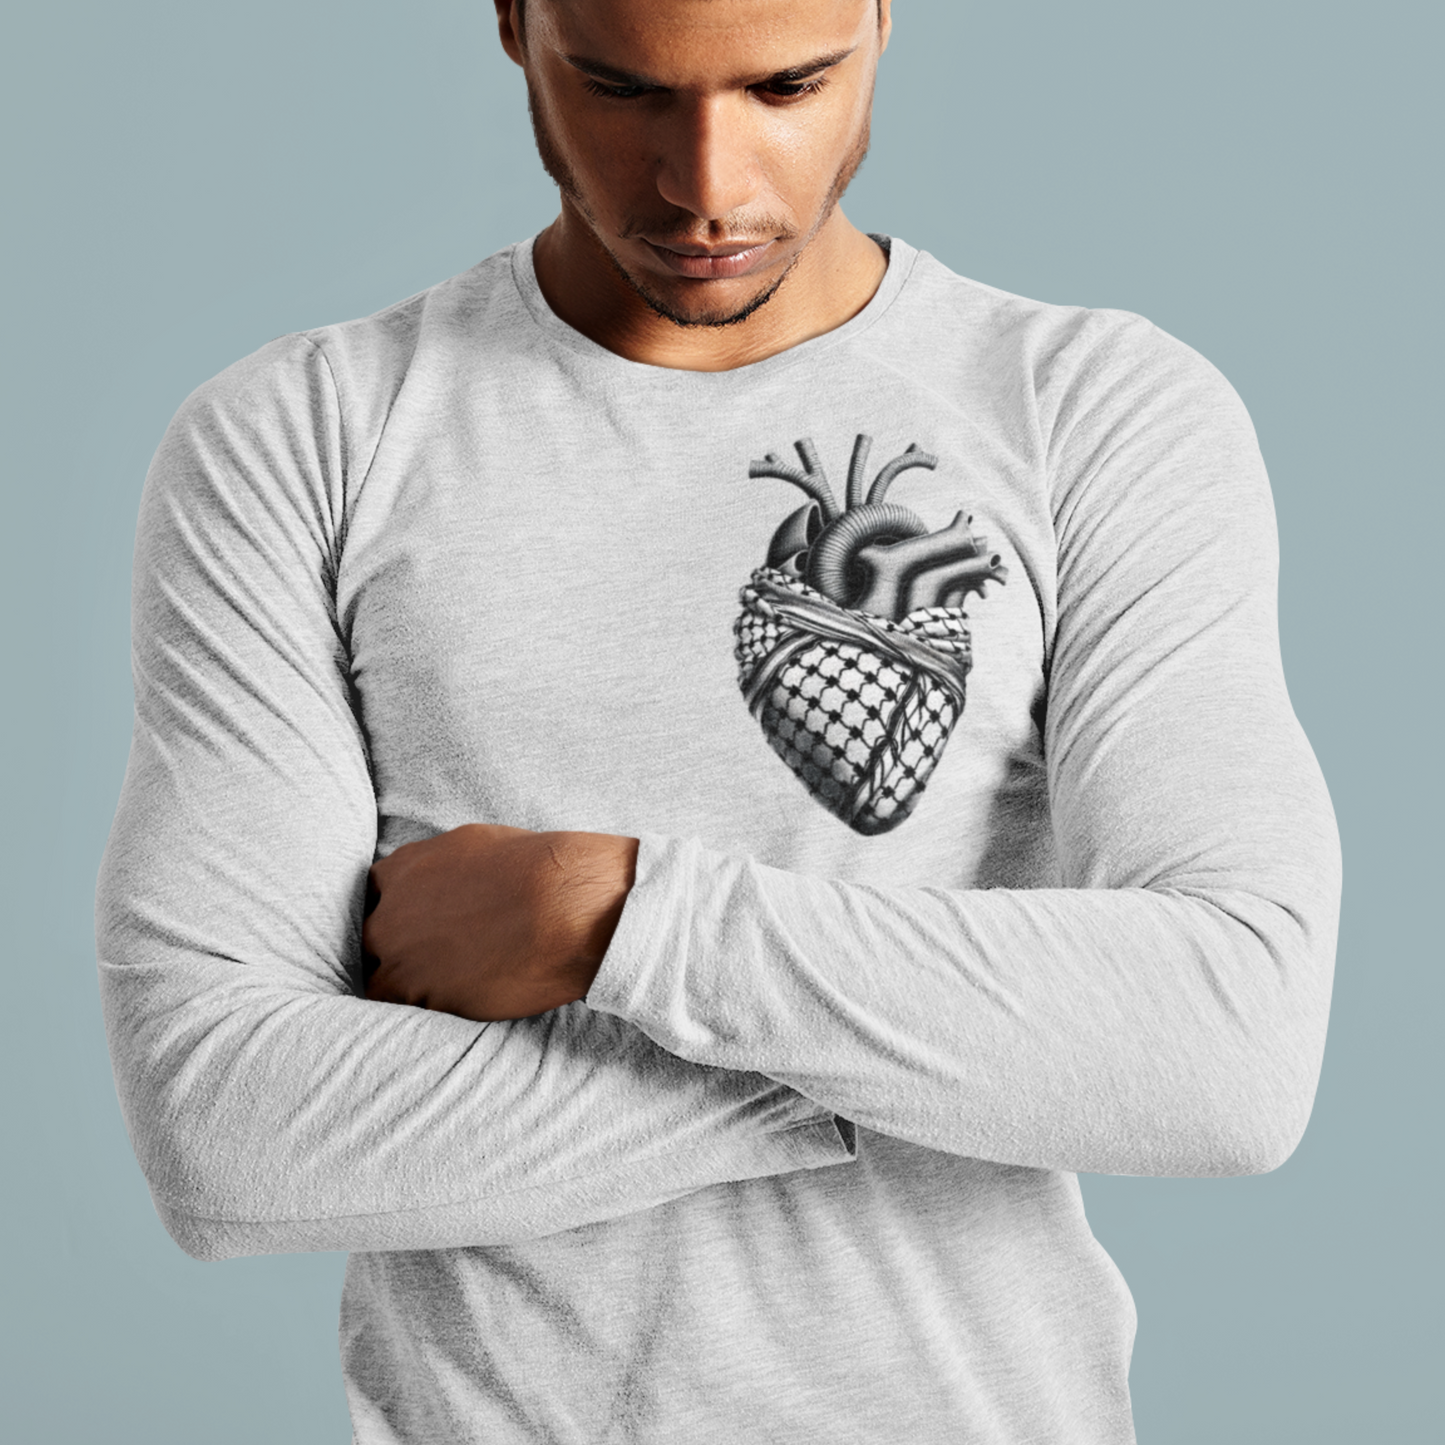 Anatomical Heart Wrapped In Keffiyeh Scarf Long Sleeved Tshirt